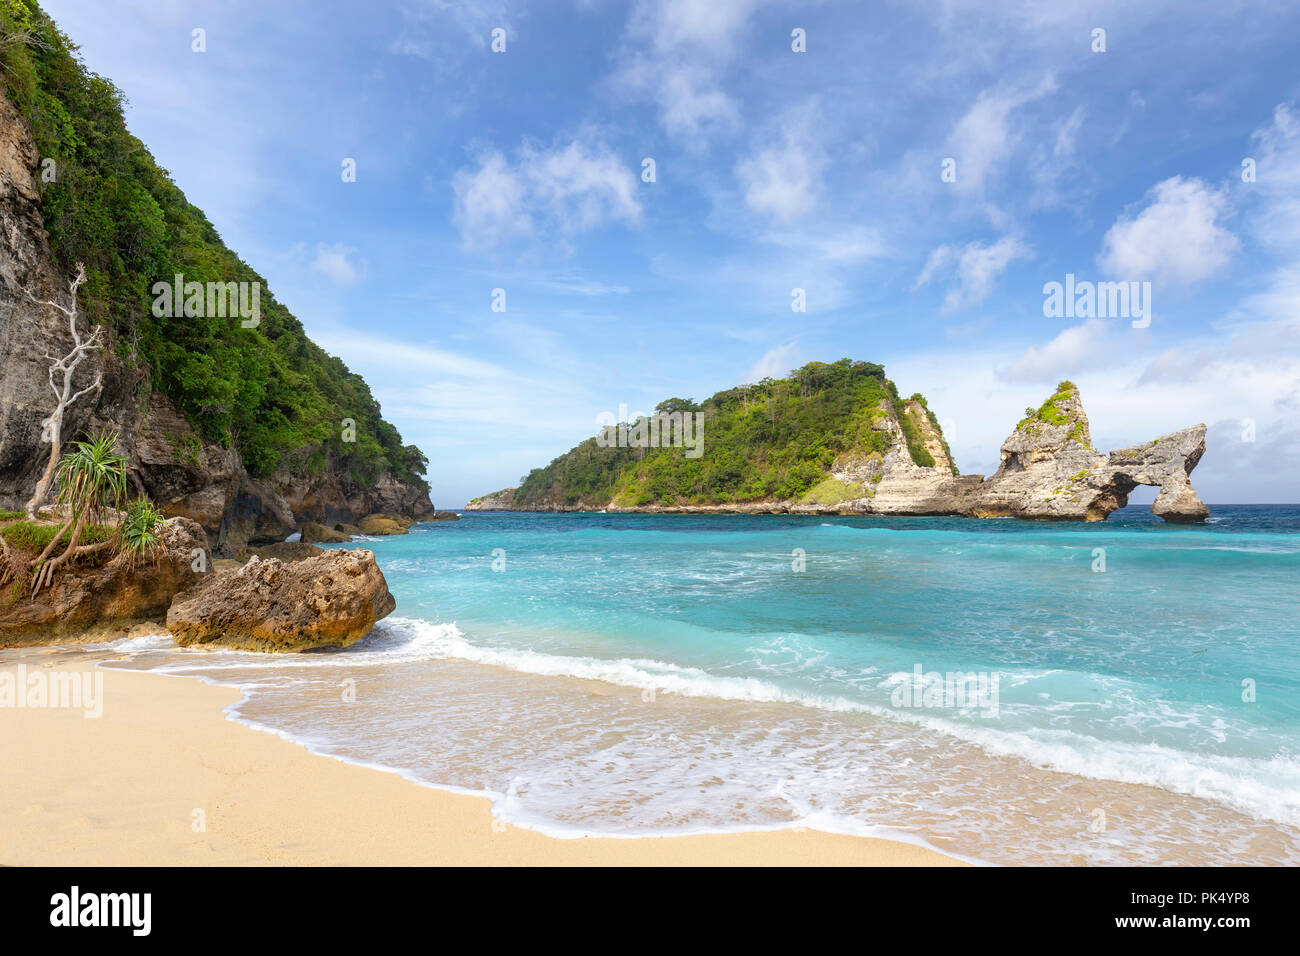 Beautiful afternoon view of an amazing arch on a small island just off of Atuh Beach in Nusa Penida. Stock Photo